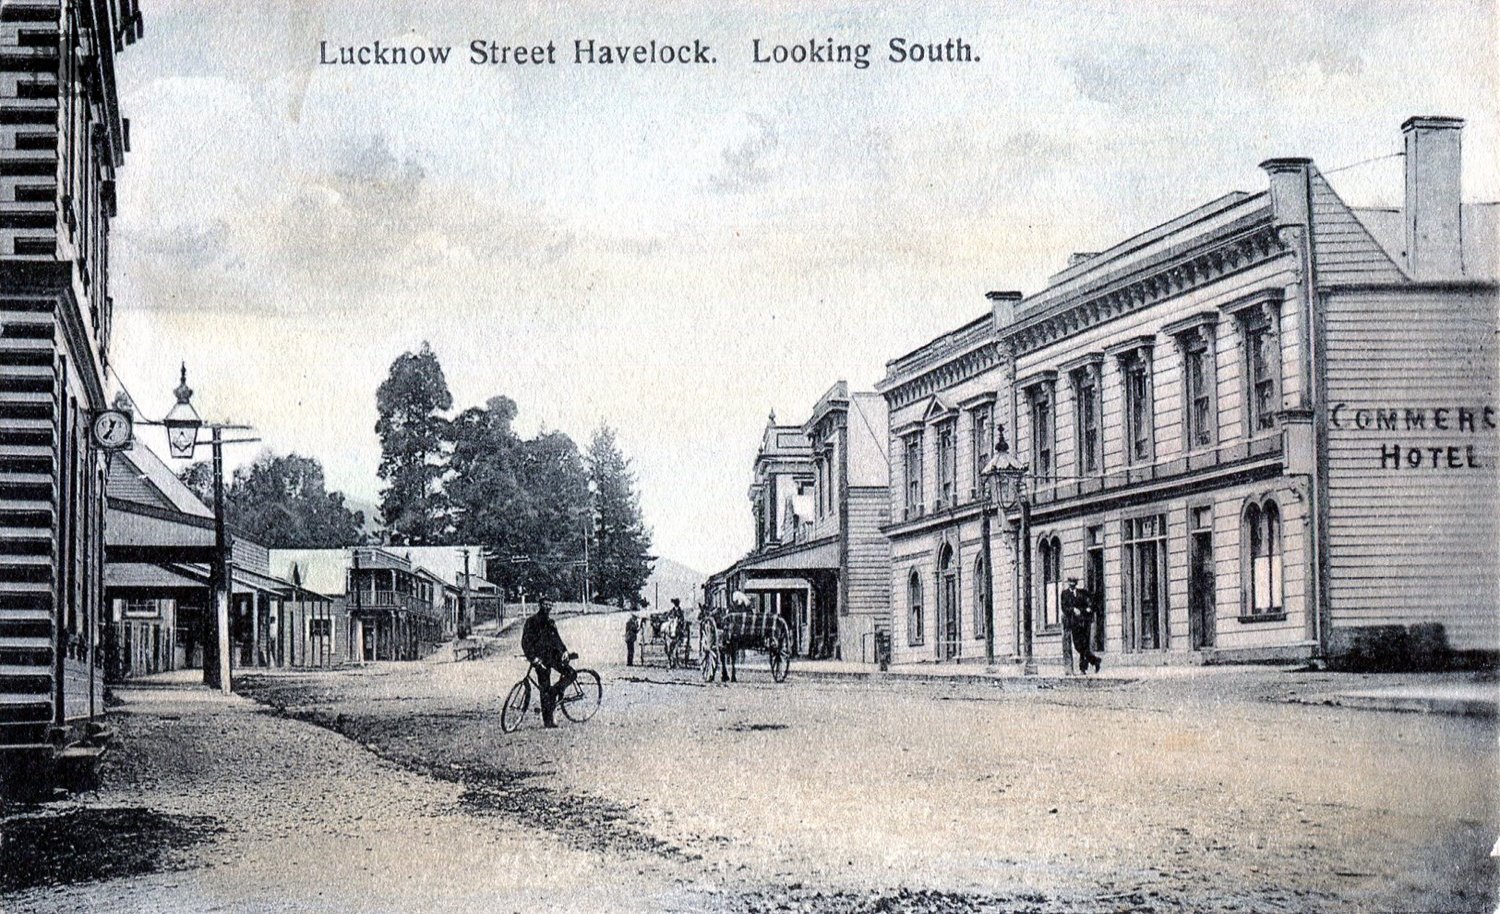 Lucknow Street Havelock (Looking South)